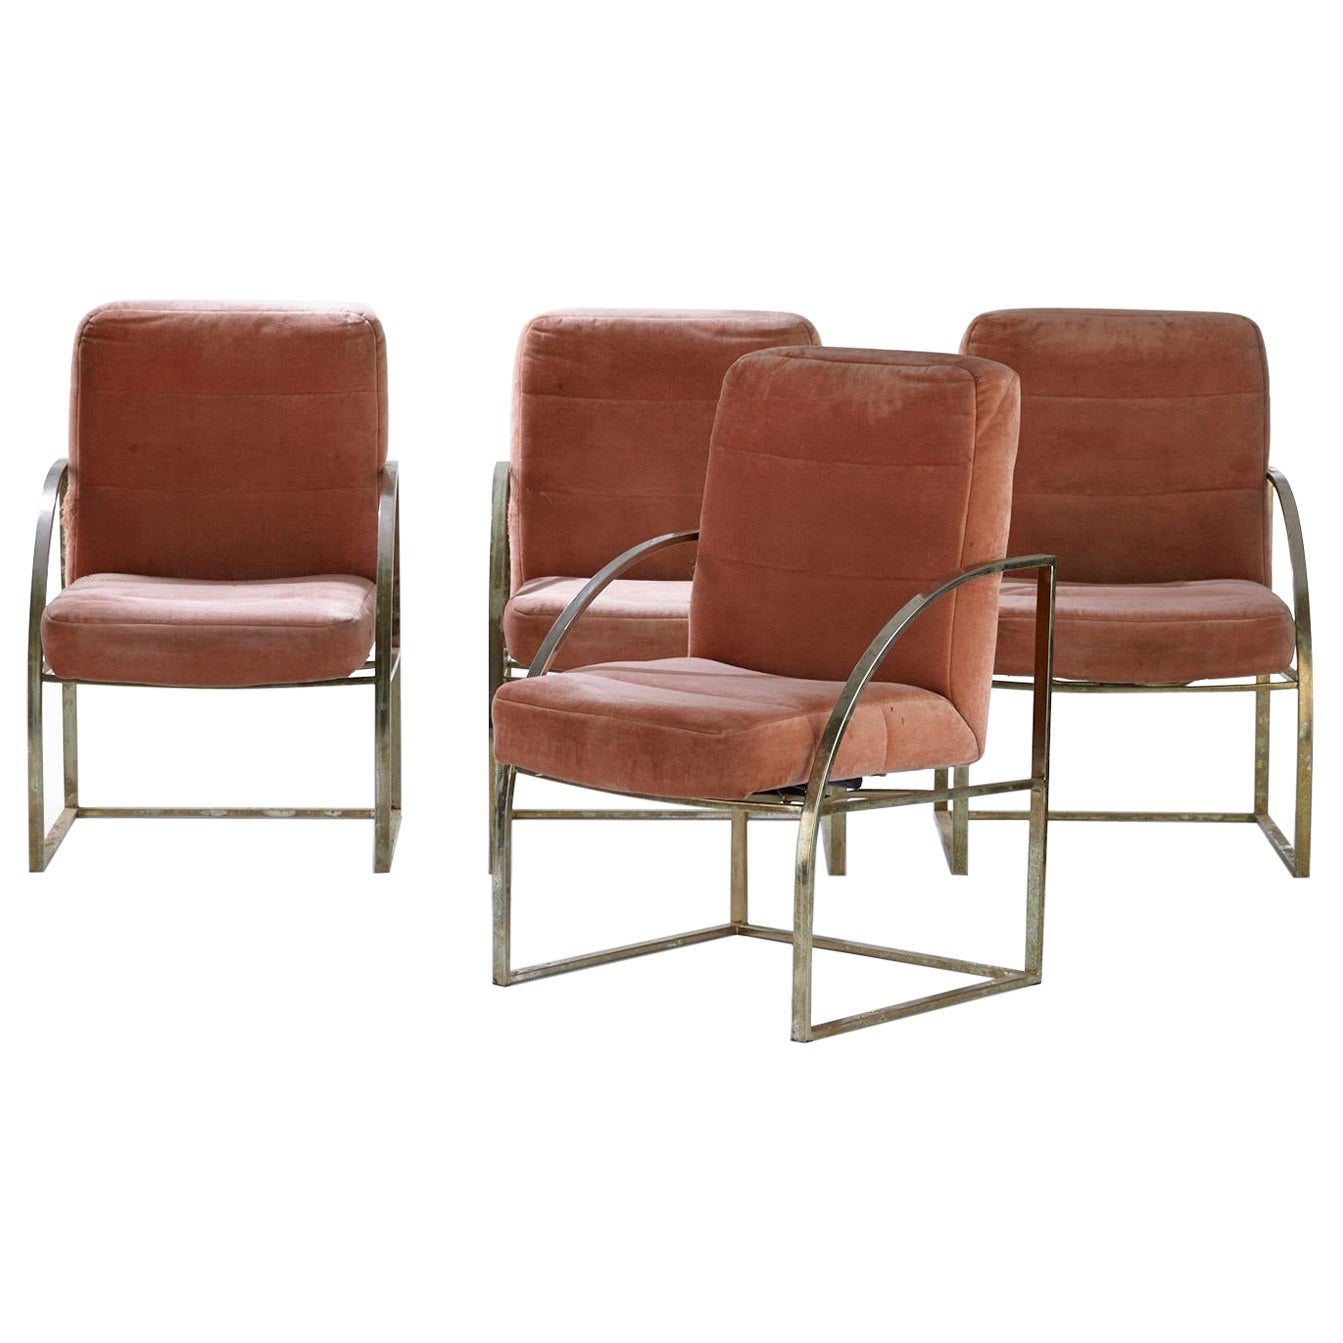 Set of Four Brass Upholstered Milo Baughman for Thayer Coggin Chairs